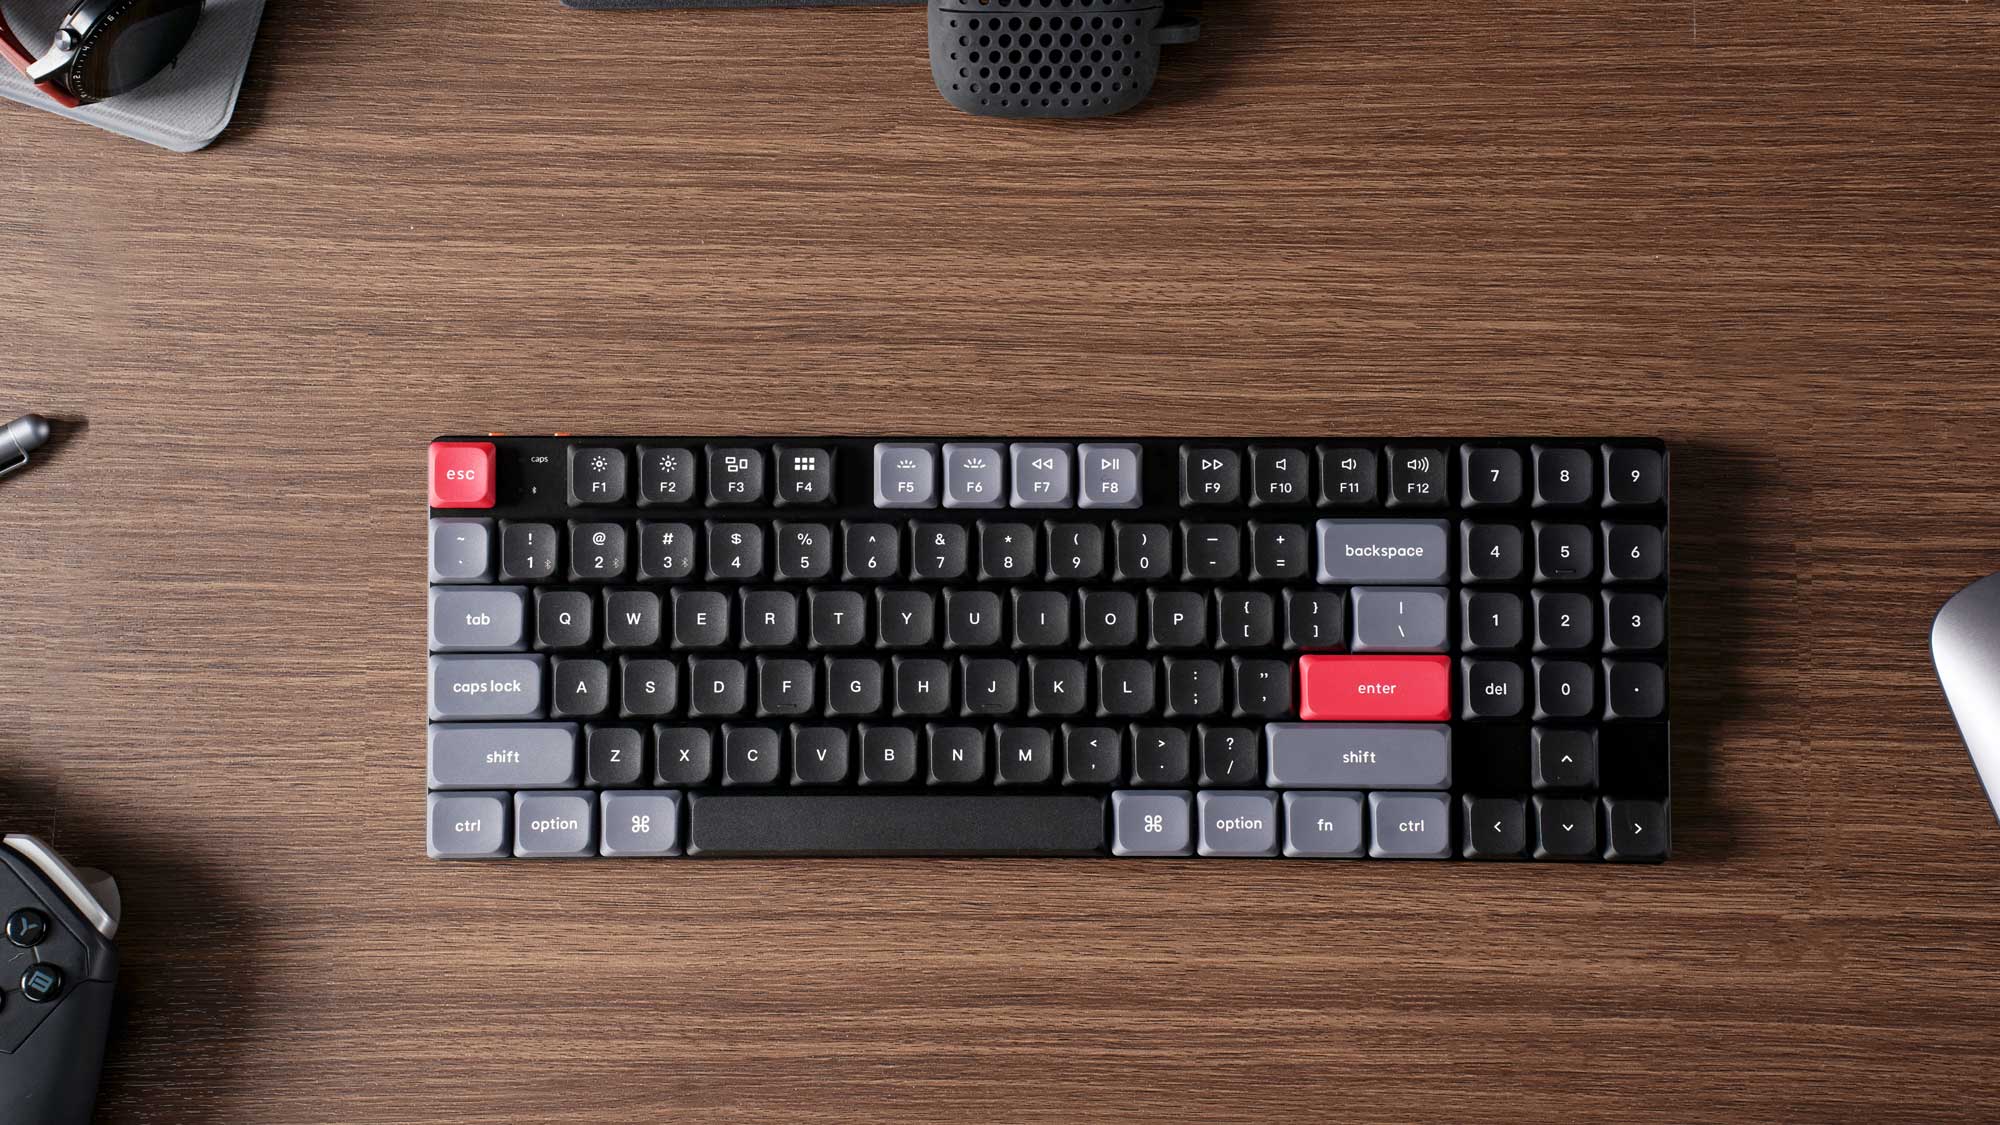 Keychron K13 Pro QMK/VIA Low-Profile Wireless Mechanical Keyboard with an ultra-slim body and hot-swappable